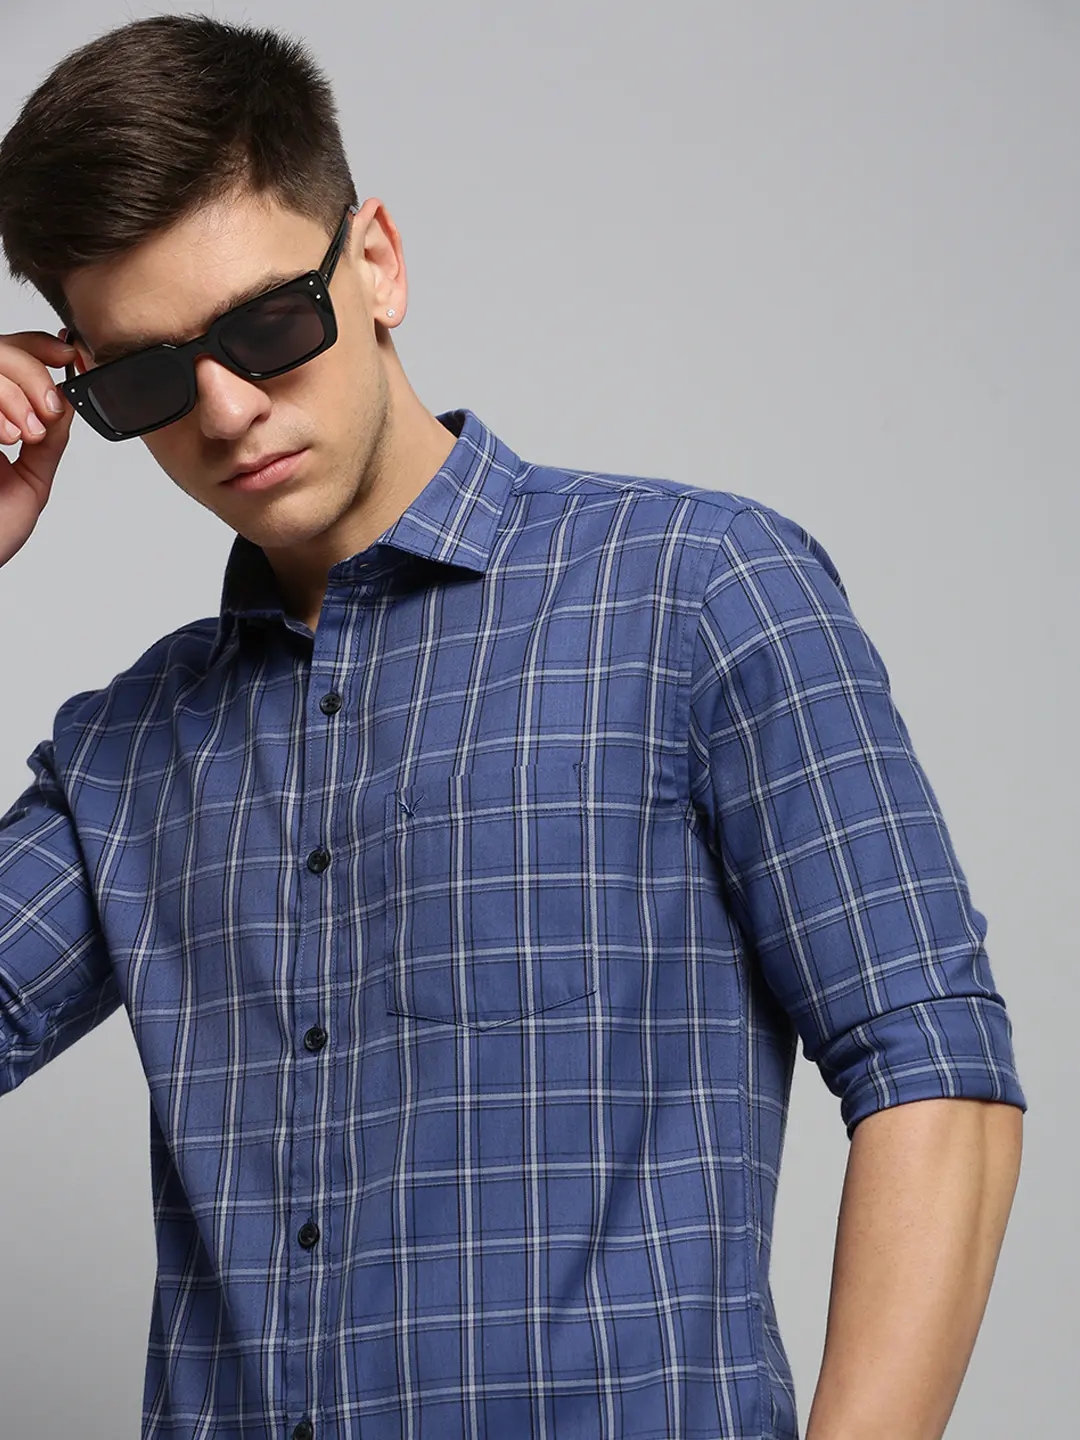 SHOWOFF Men's Spread Collar Checked Blue Classic Shirt